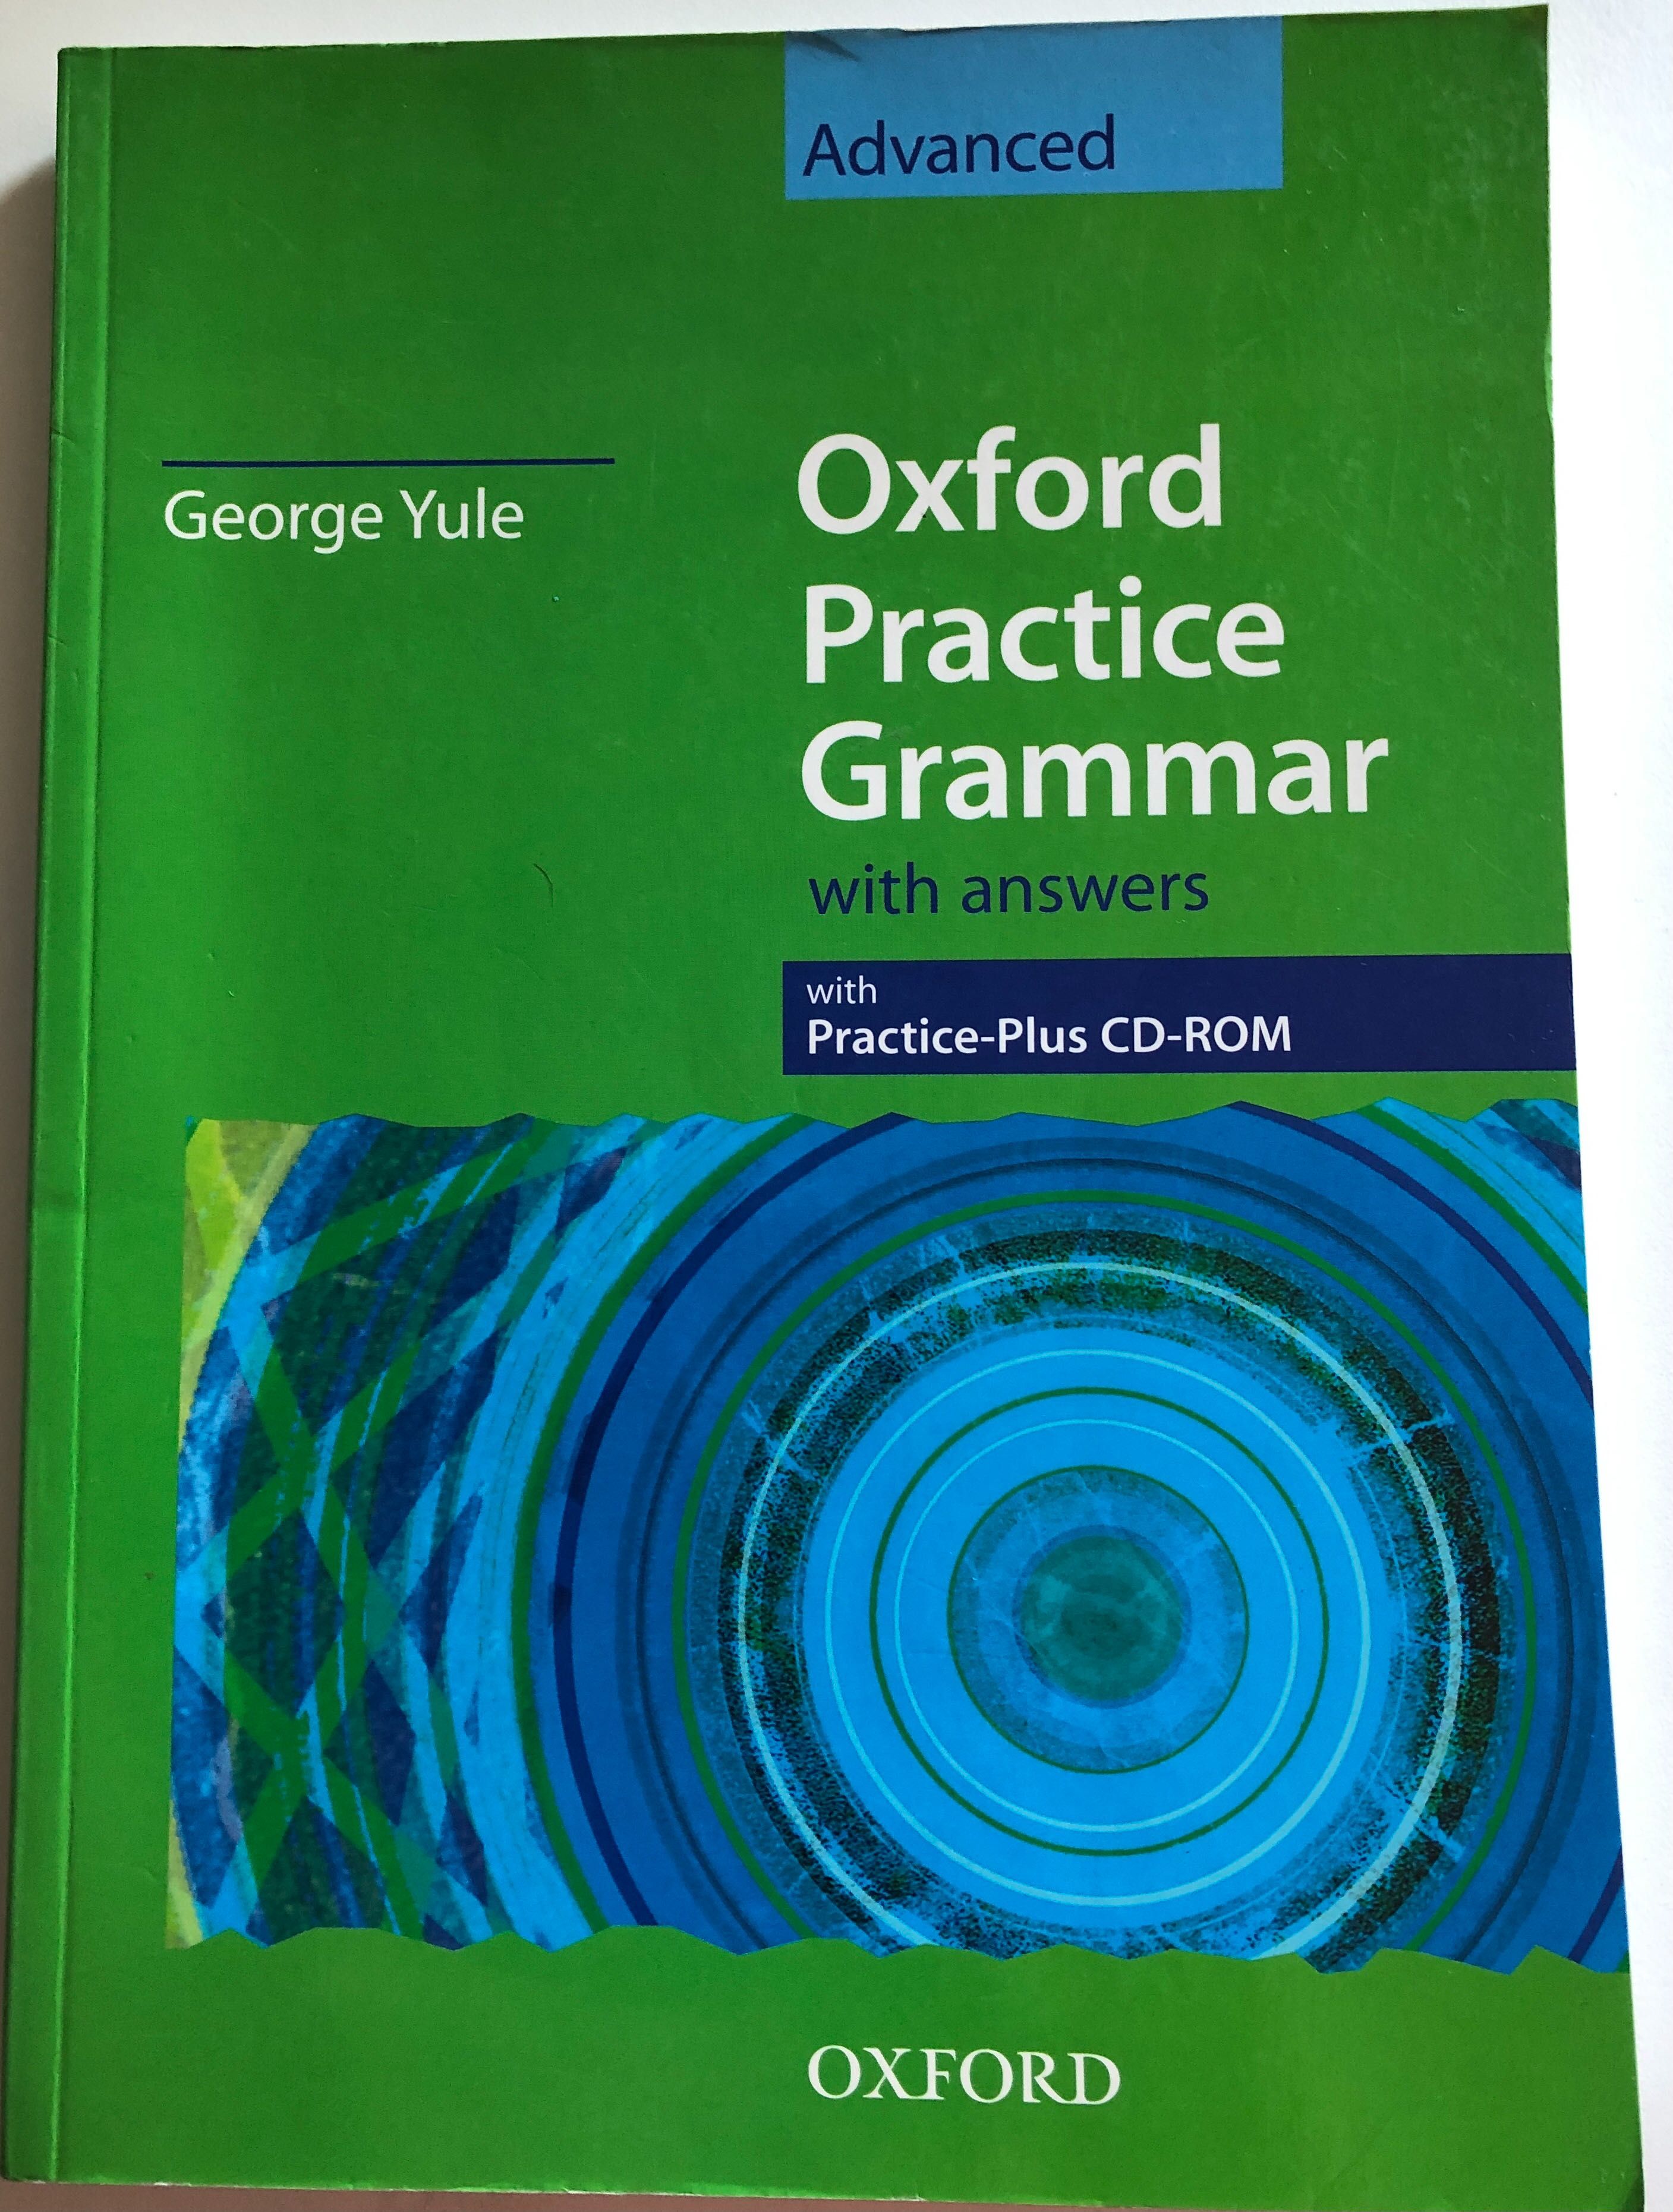 Oxford Practice Grammar with CD-ROM